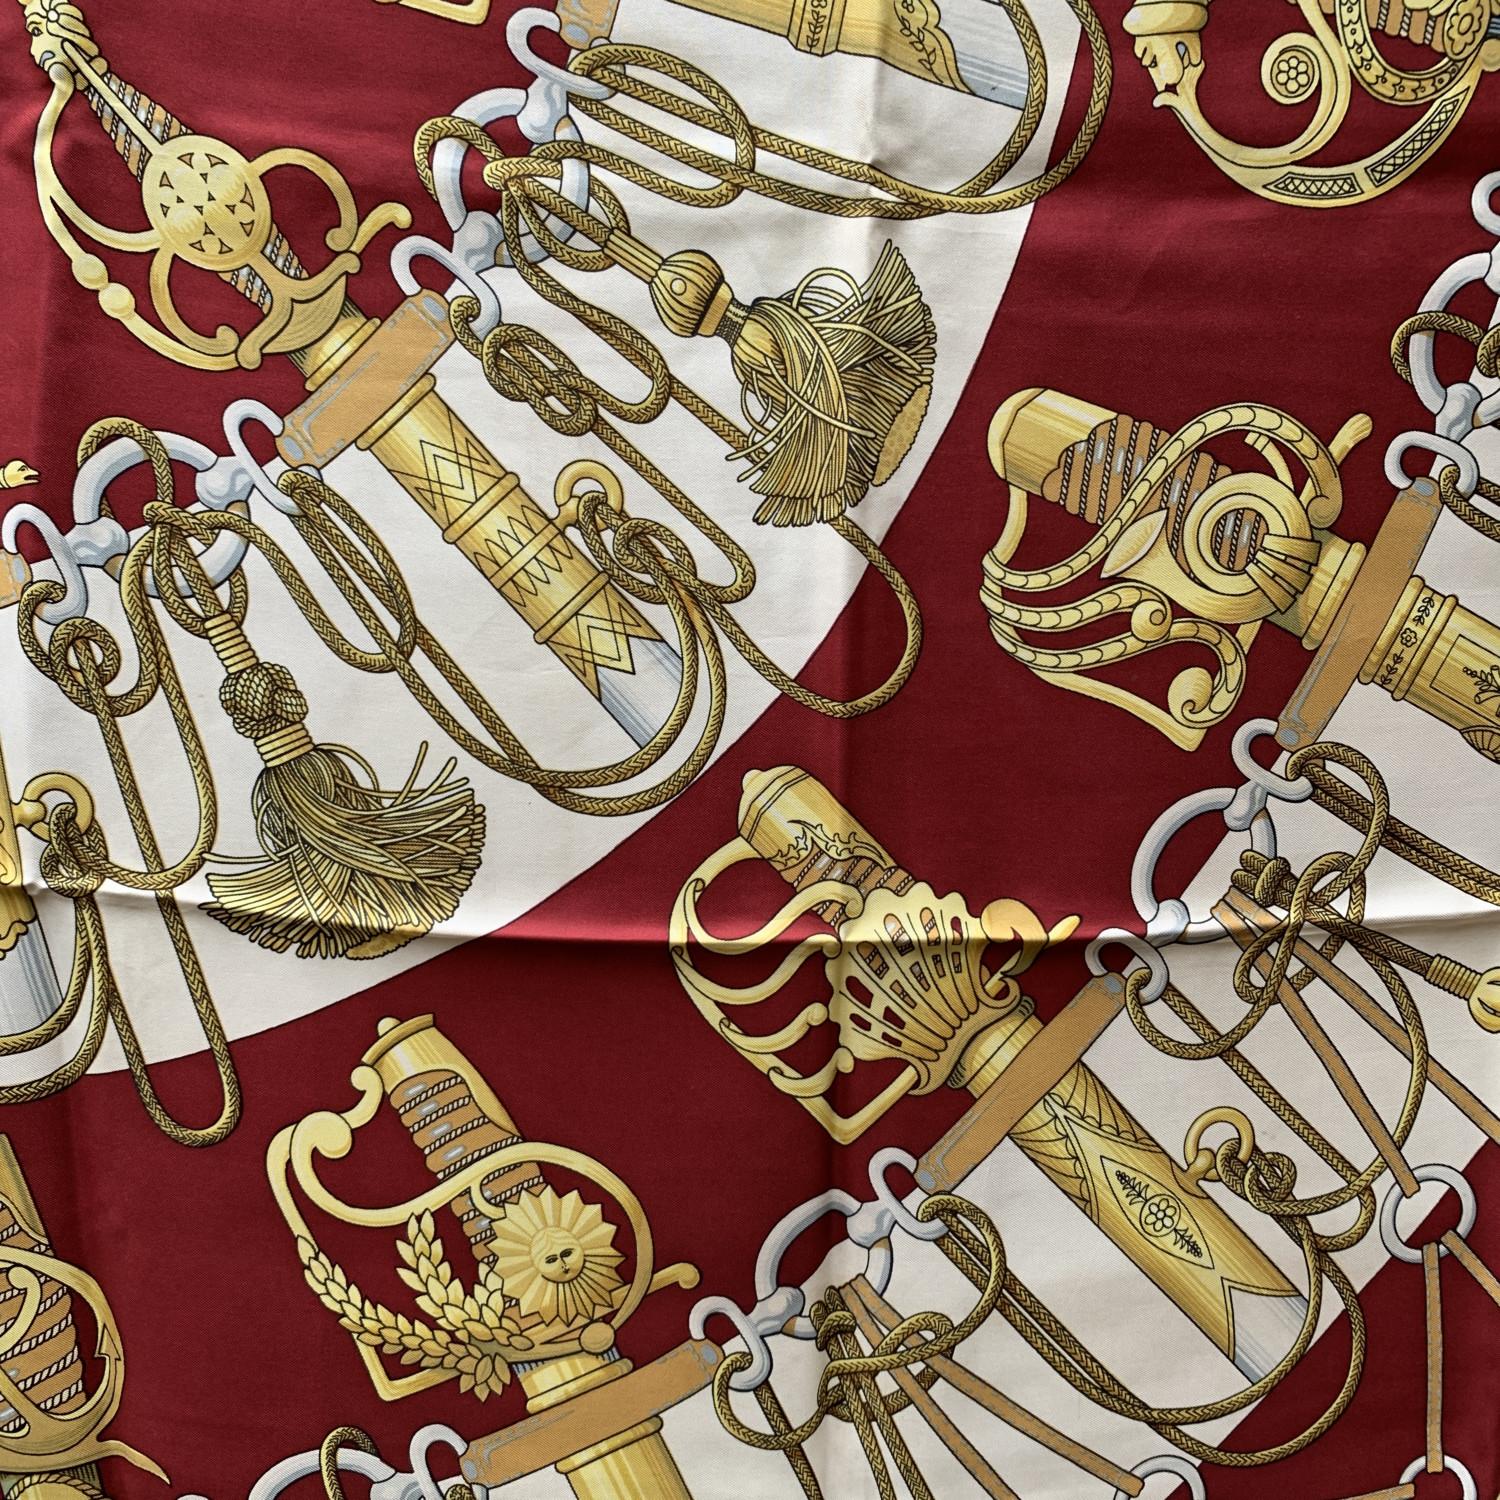 HERMES silk scarf named 'CLIQUETIS', designed by Julie Abadie and issued the first time in 1972. It features sword hilts, tassels and horsebit designs. It has re-issued many times, in different colours, formats and variations of. Hand rolled edges.